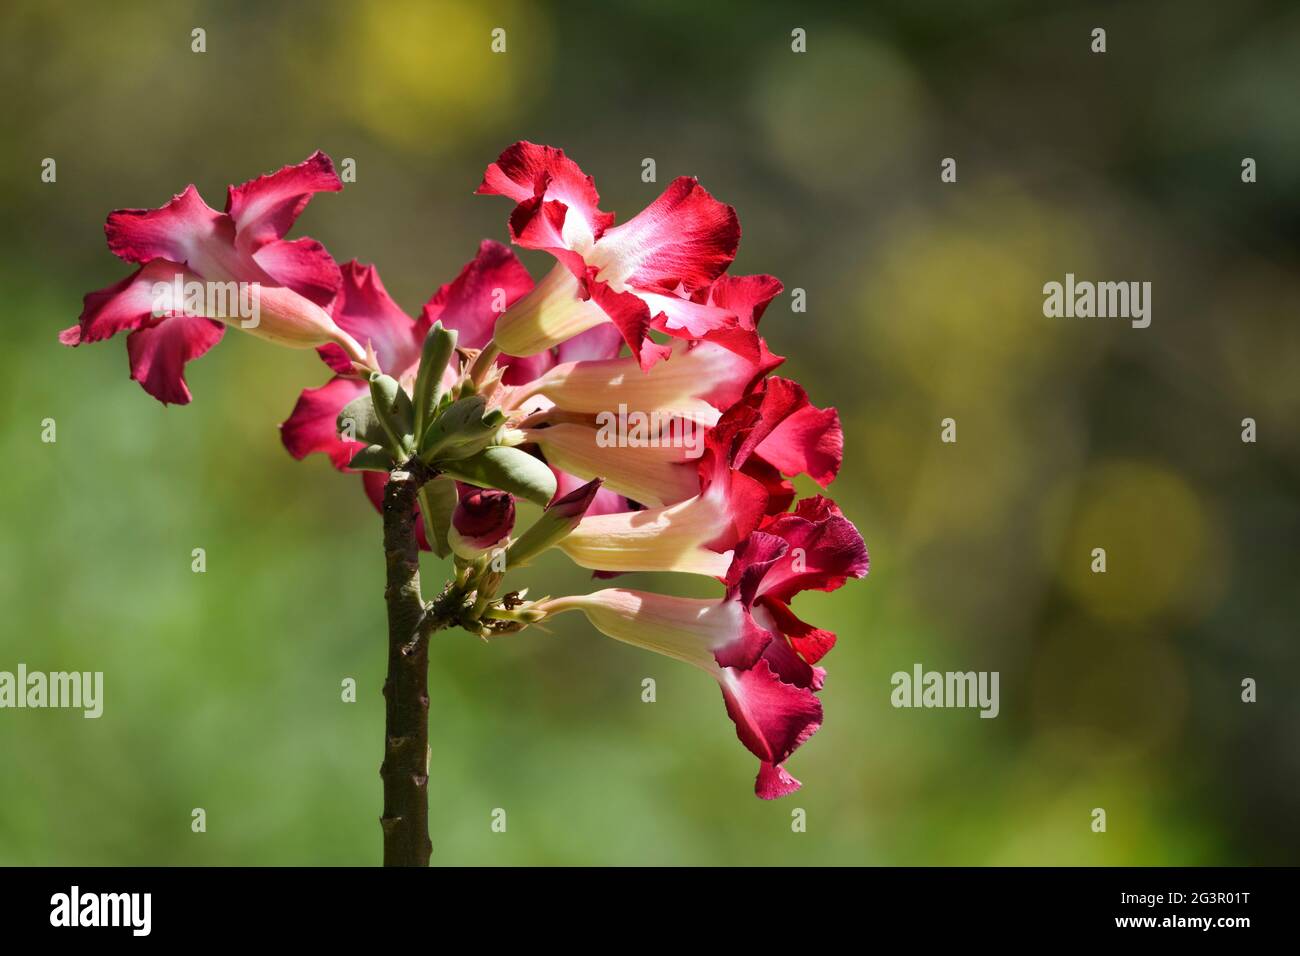 Beautiful Ornamental flowering bonsai plant Adenium also known as Desert rose or Japanese frangipani. Dark bright pink shaded with white trumbet tue s Stock Photo